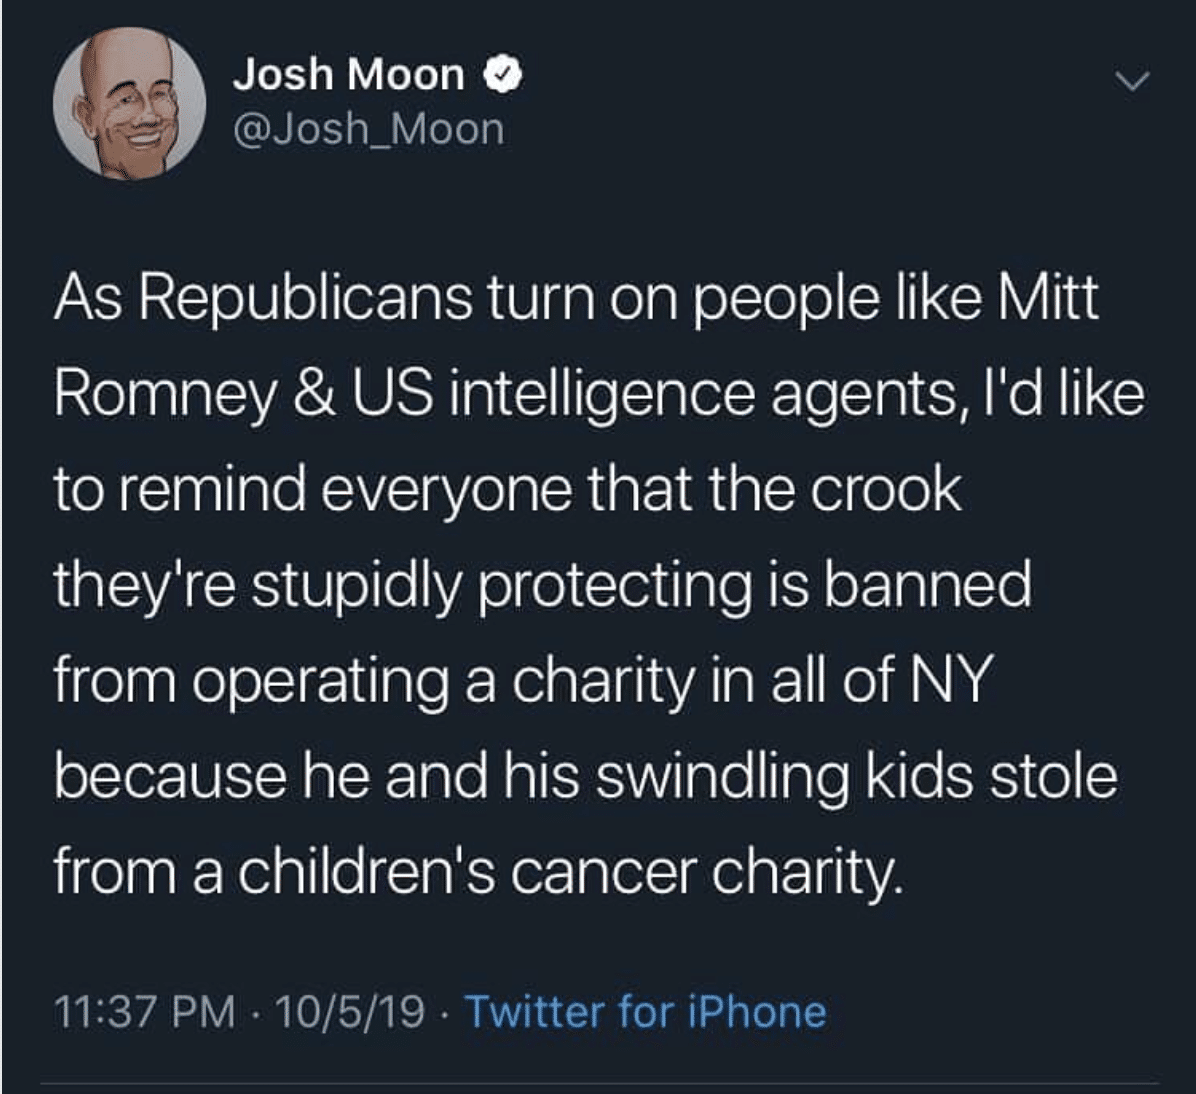 Political Tweet, Josh Moon, Mitt Romney, Charity political-memes political text: Josh Moon @Josh_Moon As Republicans turn on people like Mitt Romney & US intelligence agents, lid like to remind everyone that the crook theylre stupidly protecting is banned from operating a charity in all of NY because he and his swindling kids stole from a childrenls cancer charity 11:37 PM • 10/5/19 • Twitter for iPhone 